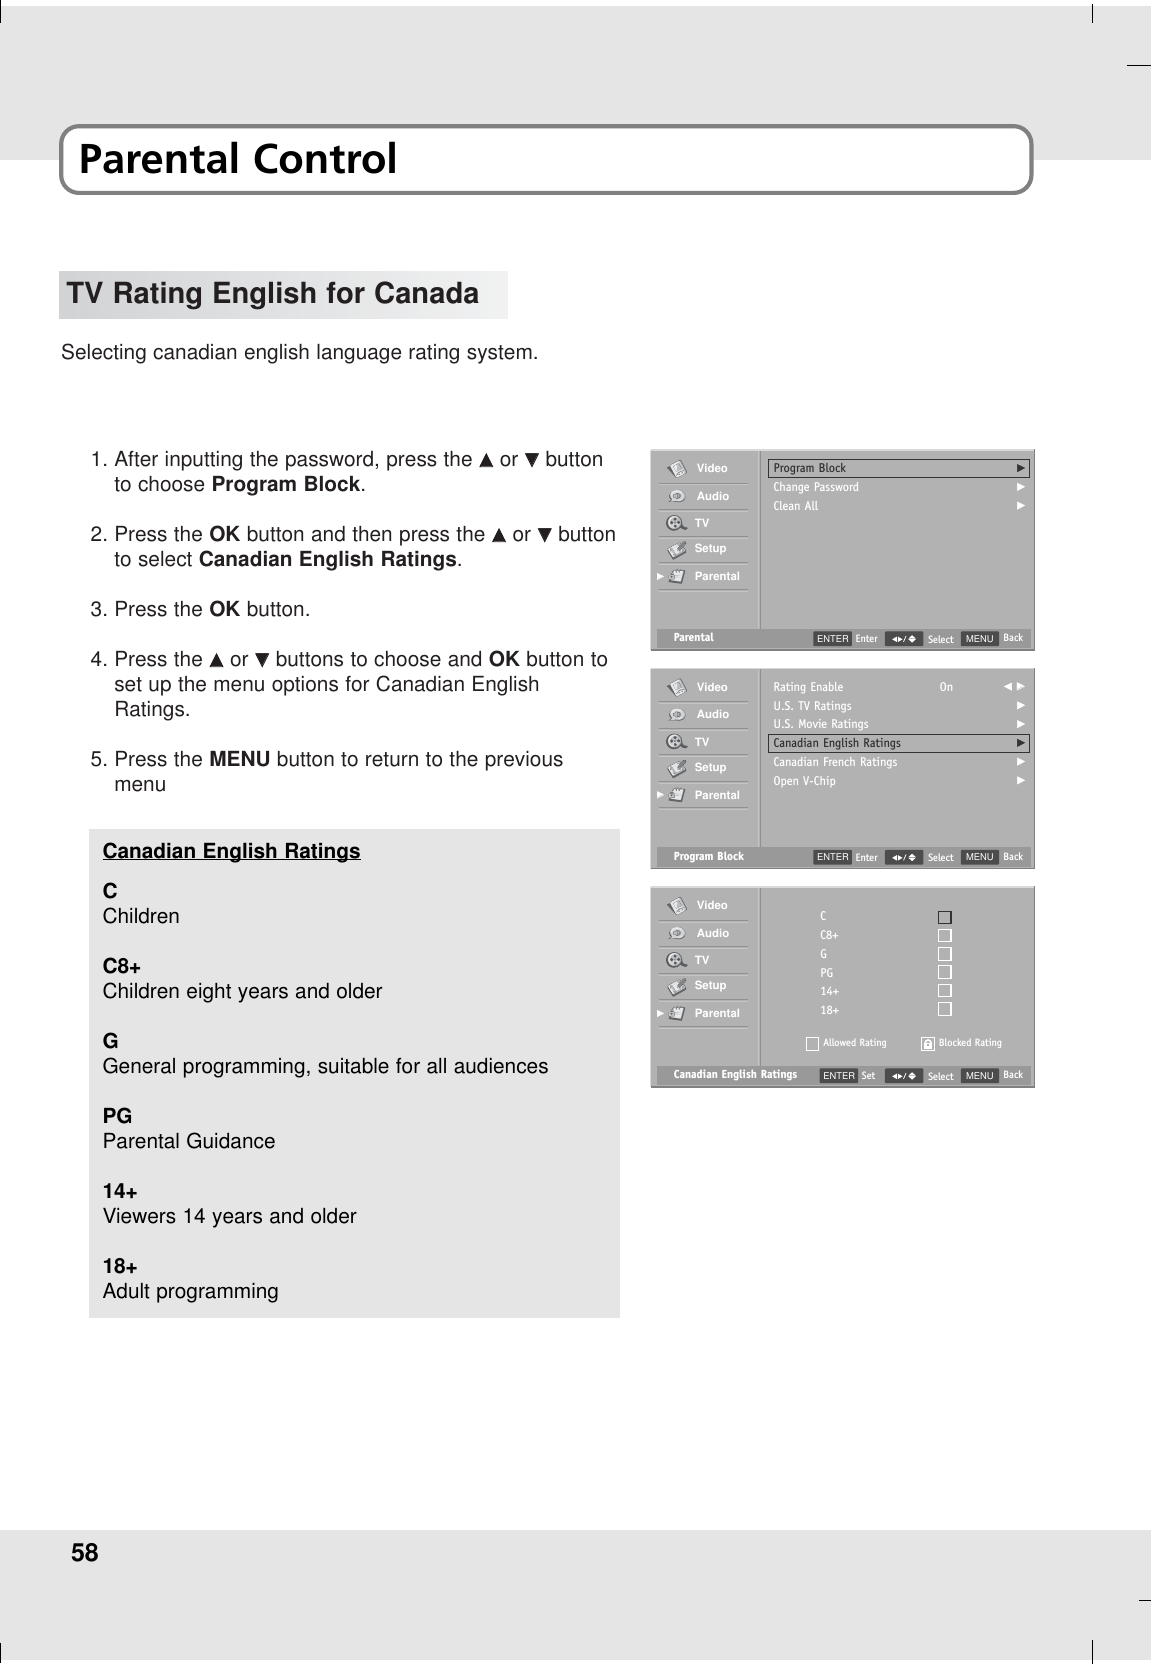 58TV Rating English for CanadaSelecting canadian english language rating system.1. After inputting the password, press the DDor EEbuttonto choose Program Block.2. Press the OK button and then press the DDor EEbuttonto select Canadian English Ratings.3. Press the OK button.4. Press the DDor EEbuttons to choose and OK button toset up the menu options for Canadian EnglishRatings.5. Press the MENU button to return to the previousmenuParental MENU BackSelectProgram BlockChange PasswordClean AllGGGVideoAudioTVSetupParentalGGENTER EnterProgram Block MENU BackSelectRating EnableU.S. TV RatingsU.S. Movie RatingsCanadian English RatingsCanadian French RatingsOpen V-ChipOn F GGGGGGGVideoAudioTVSetupParentalGGENTER EnterCanadian English Ratings MENU BackSelectCC8+GPG14+18+Allowed RatingVideoAudioTVSetupParentalGGBlocked RatingENTER SetCChildrenC8+Children eight years and olderGGeneral programming, suitable for all audiencesPGParental Guidance 14+Viewers 14 years and older18+Adult programmingCanadian English RatingsParental Control